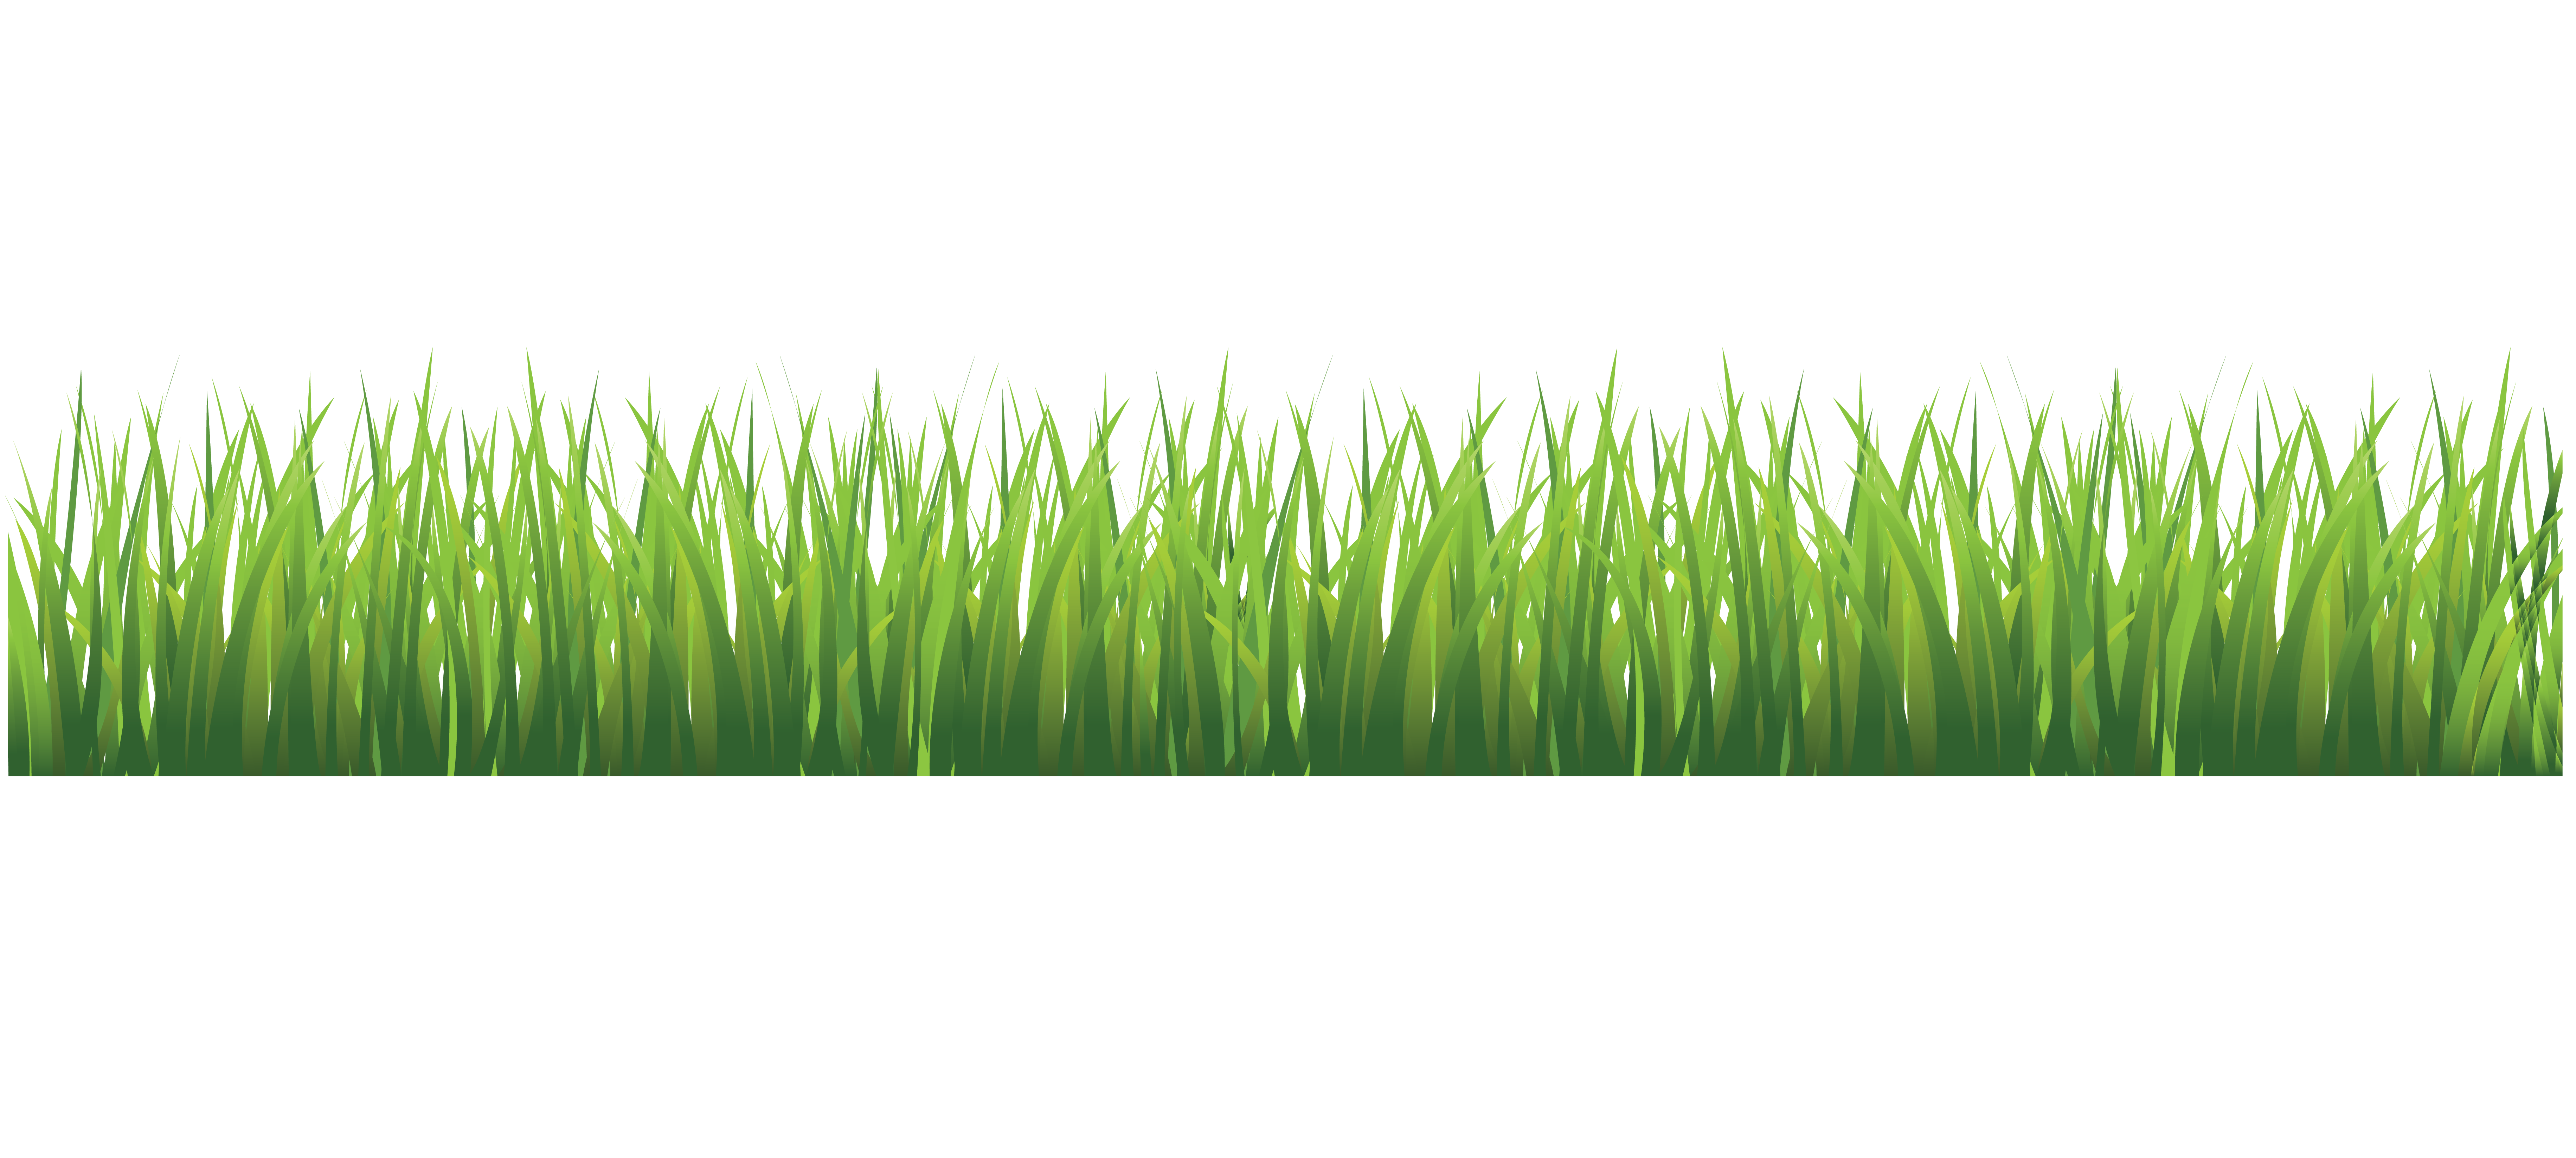 Grass Png Transparent Image Download Size 7327x3295px